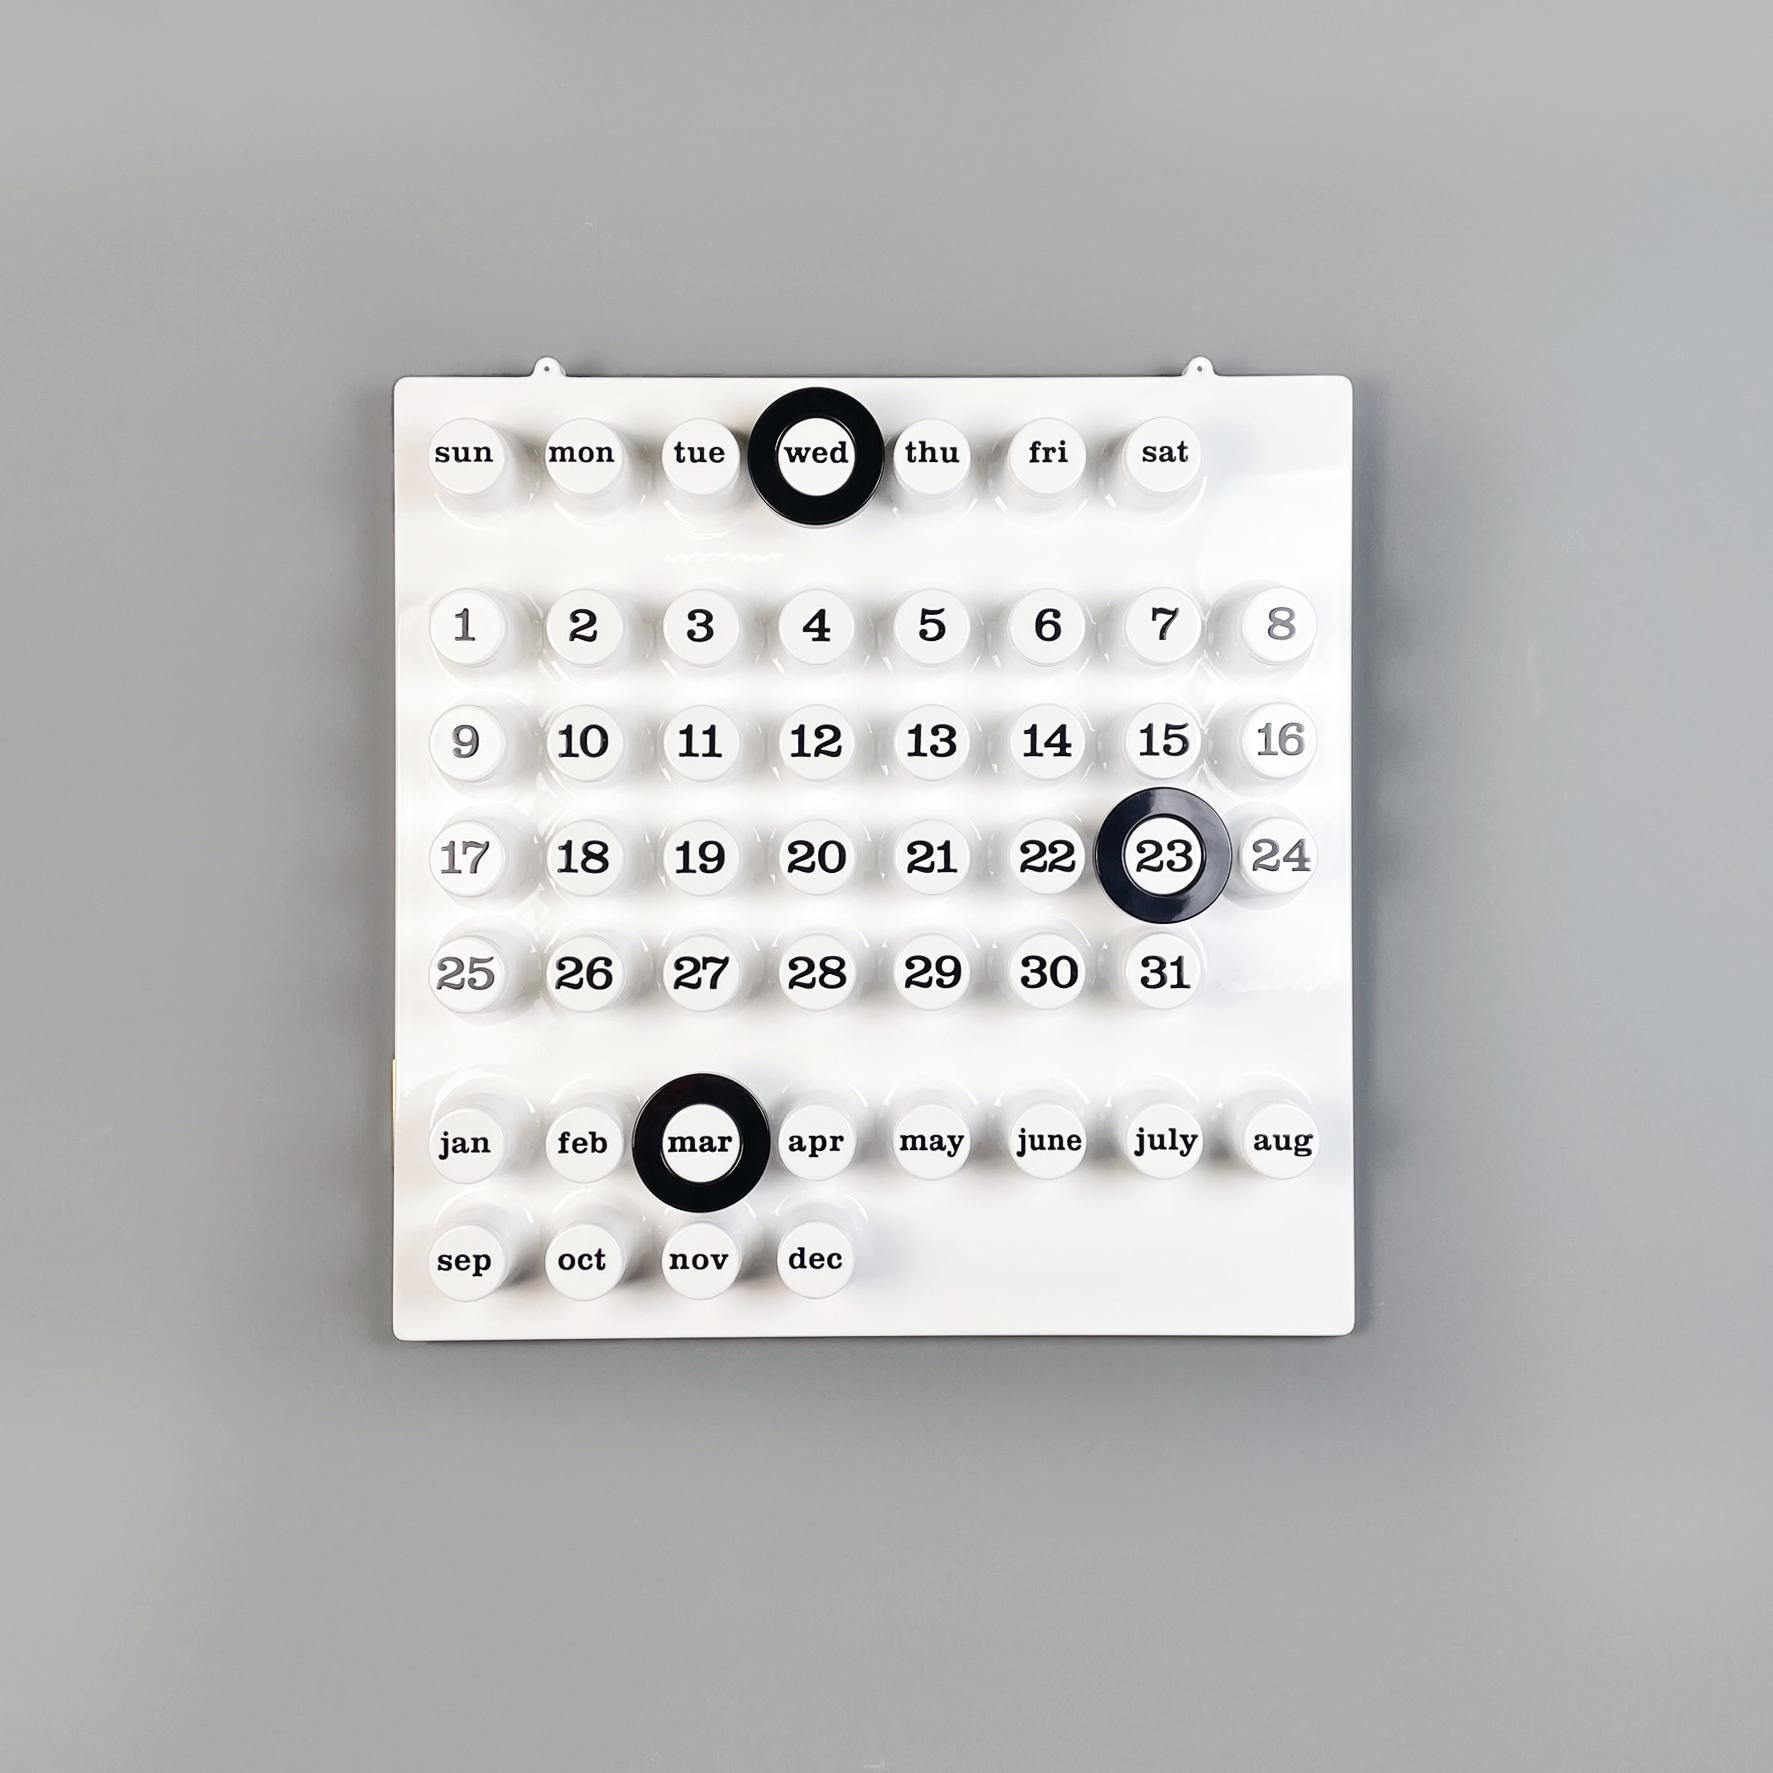 Italian postmodern Wall perpetual calendar by Giorgio Della Beffa for Ring A Date, 2000-2010s
Iconic and elegant wall perpetual calendar in white plastic. The calendar has several protruding cylinders: these correspond to the days of the week in